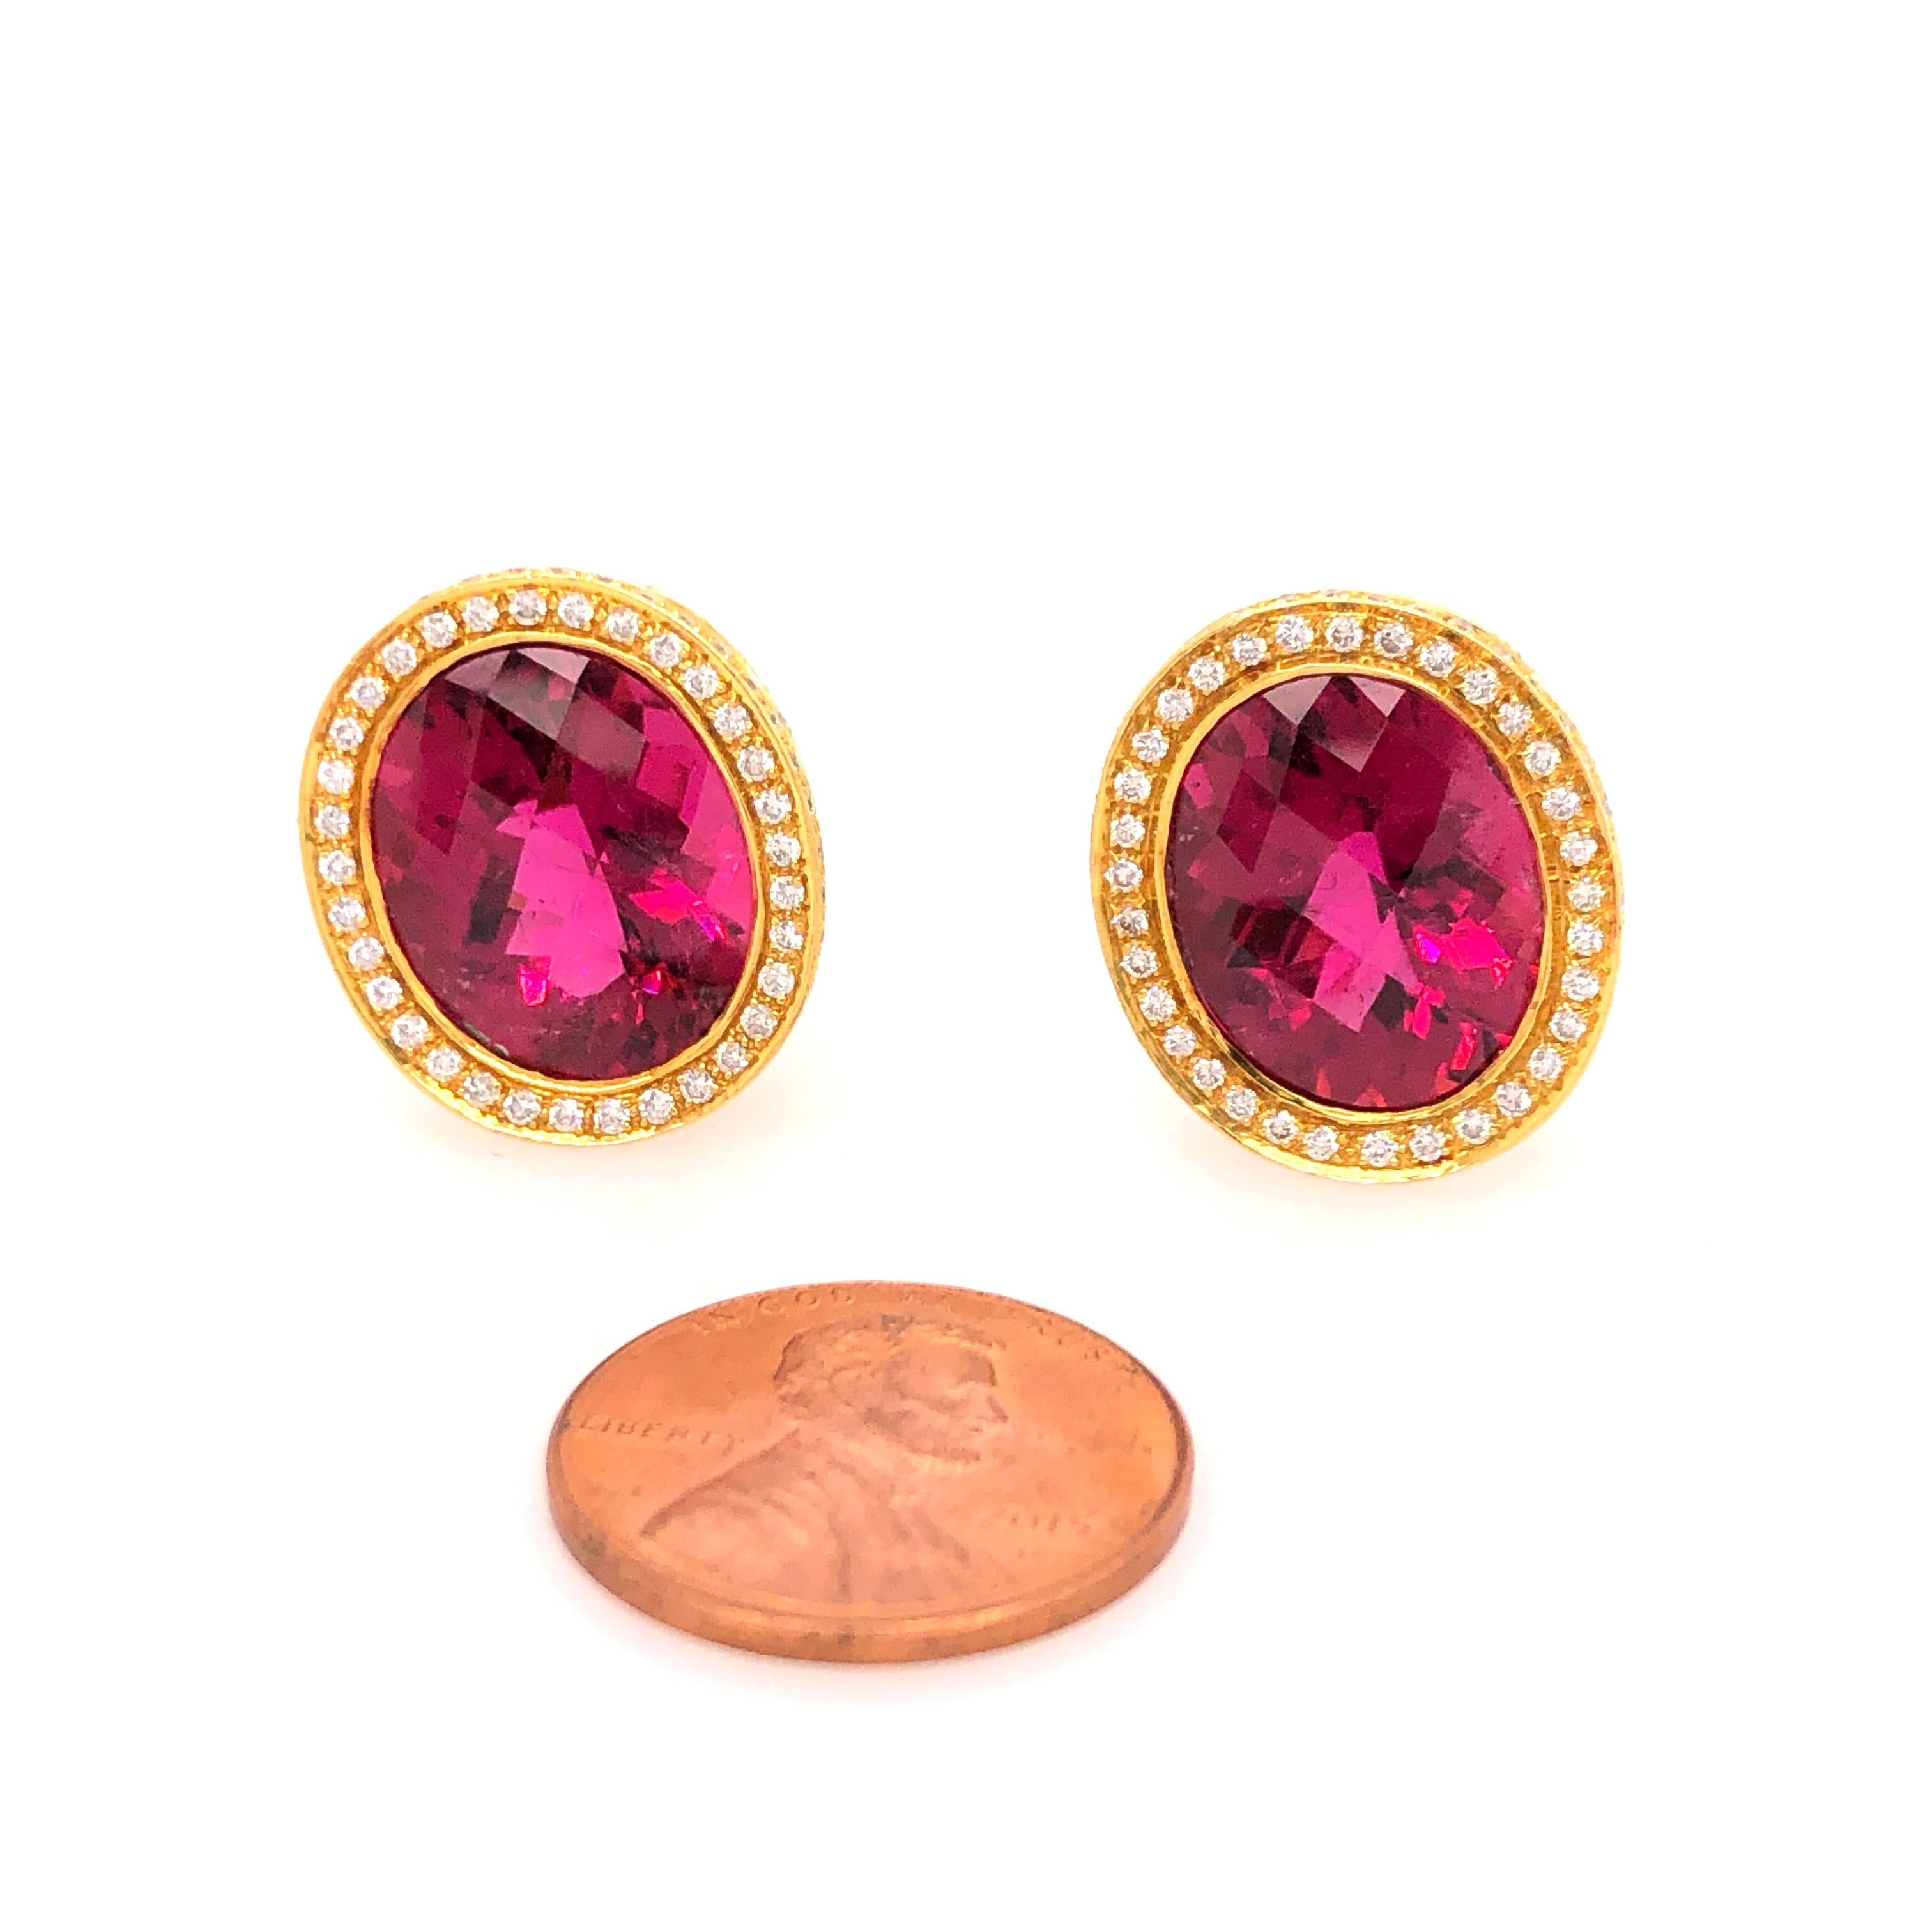 A wonderful flash of deep pink, Laura Munder's design is elegant but not afraid to be noticed. This matched pair of gem quality rubellites ( 10 CTS each ) are faceted and surrounded by diamonds (total diamond weight is approximately 3 CTS). The